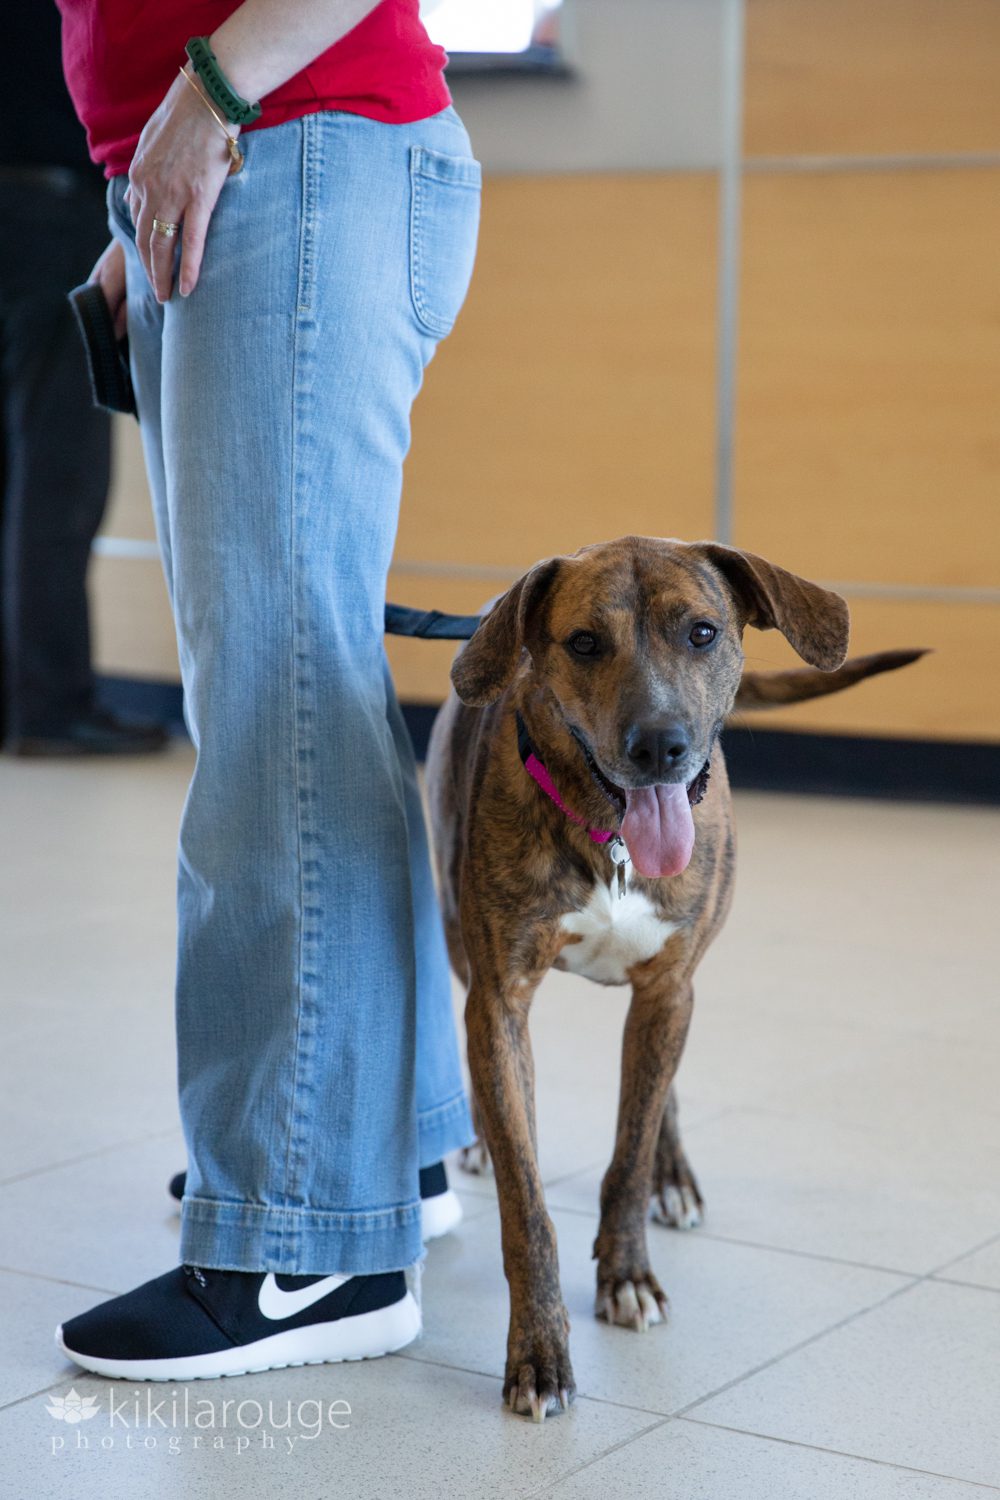 Rescue dog wagging tail with handler in jeans